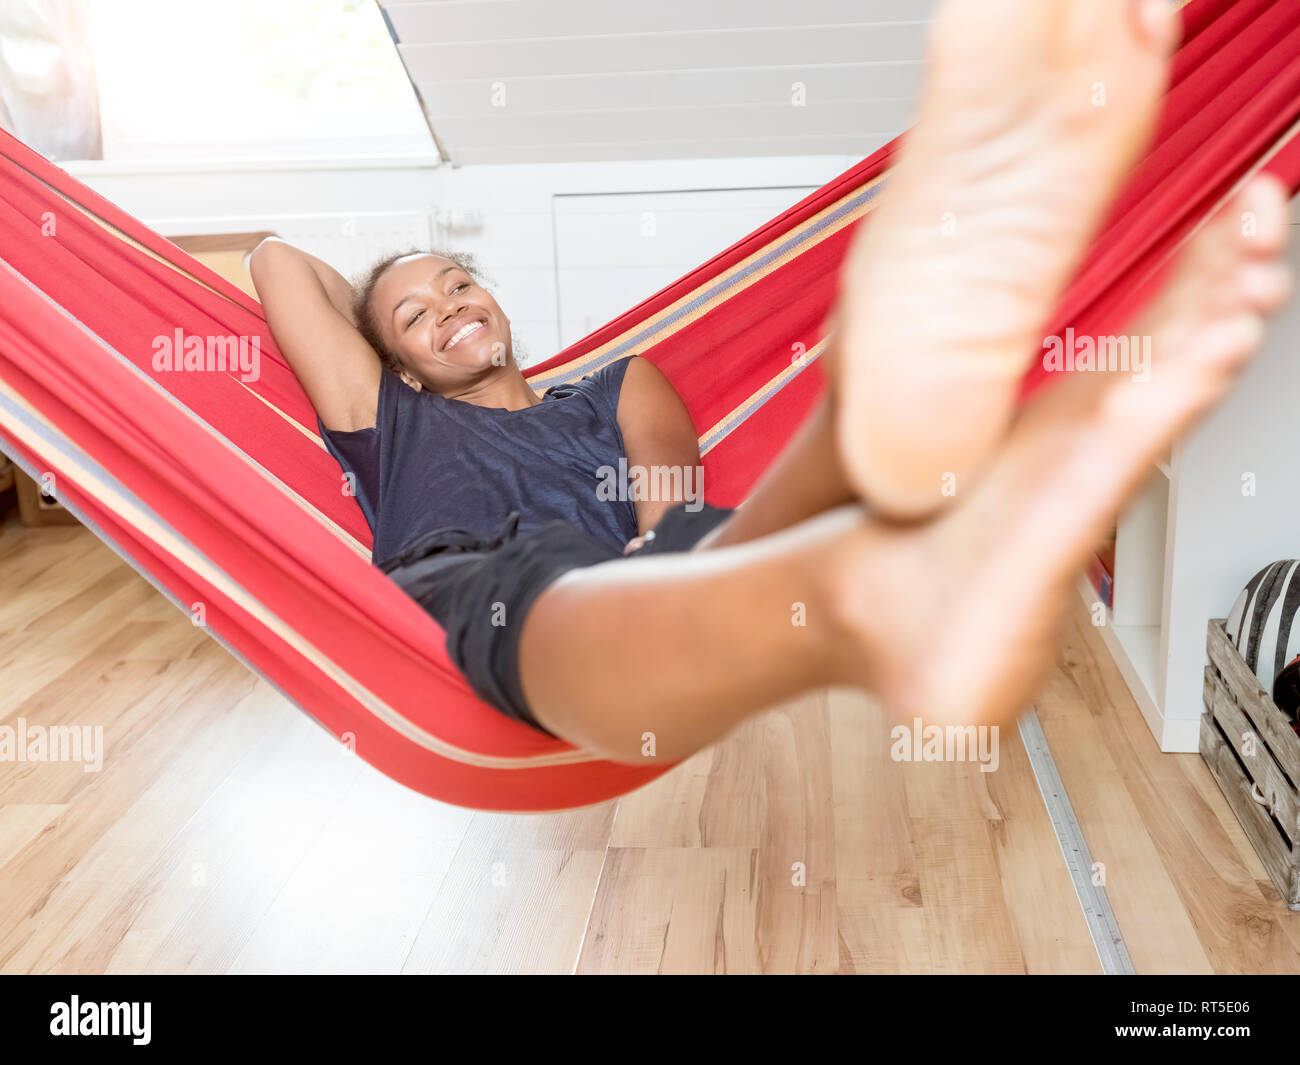 Smiling young woman lying in hammock Banque D'Images